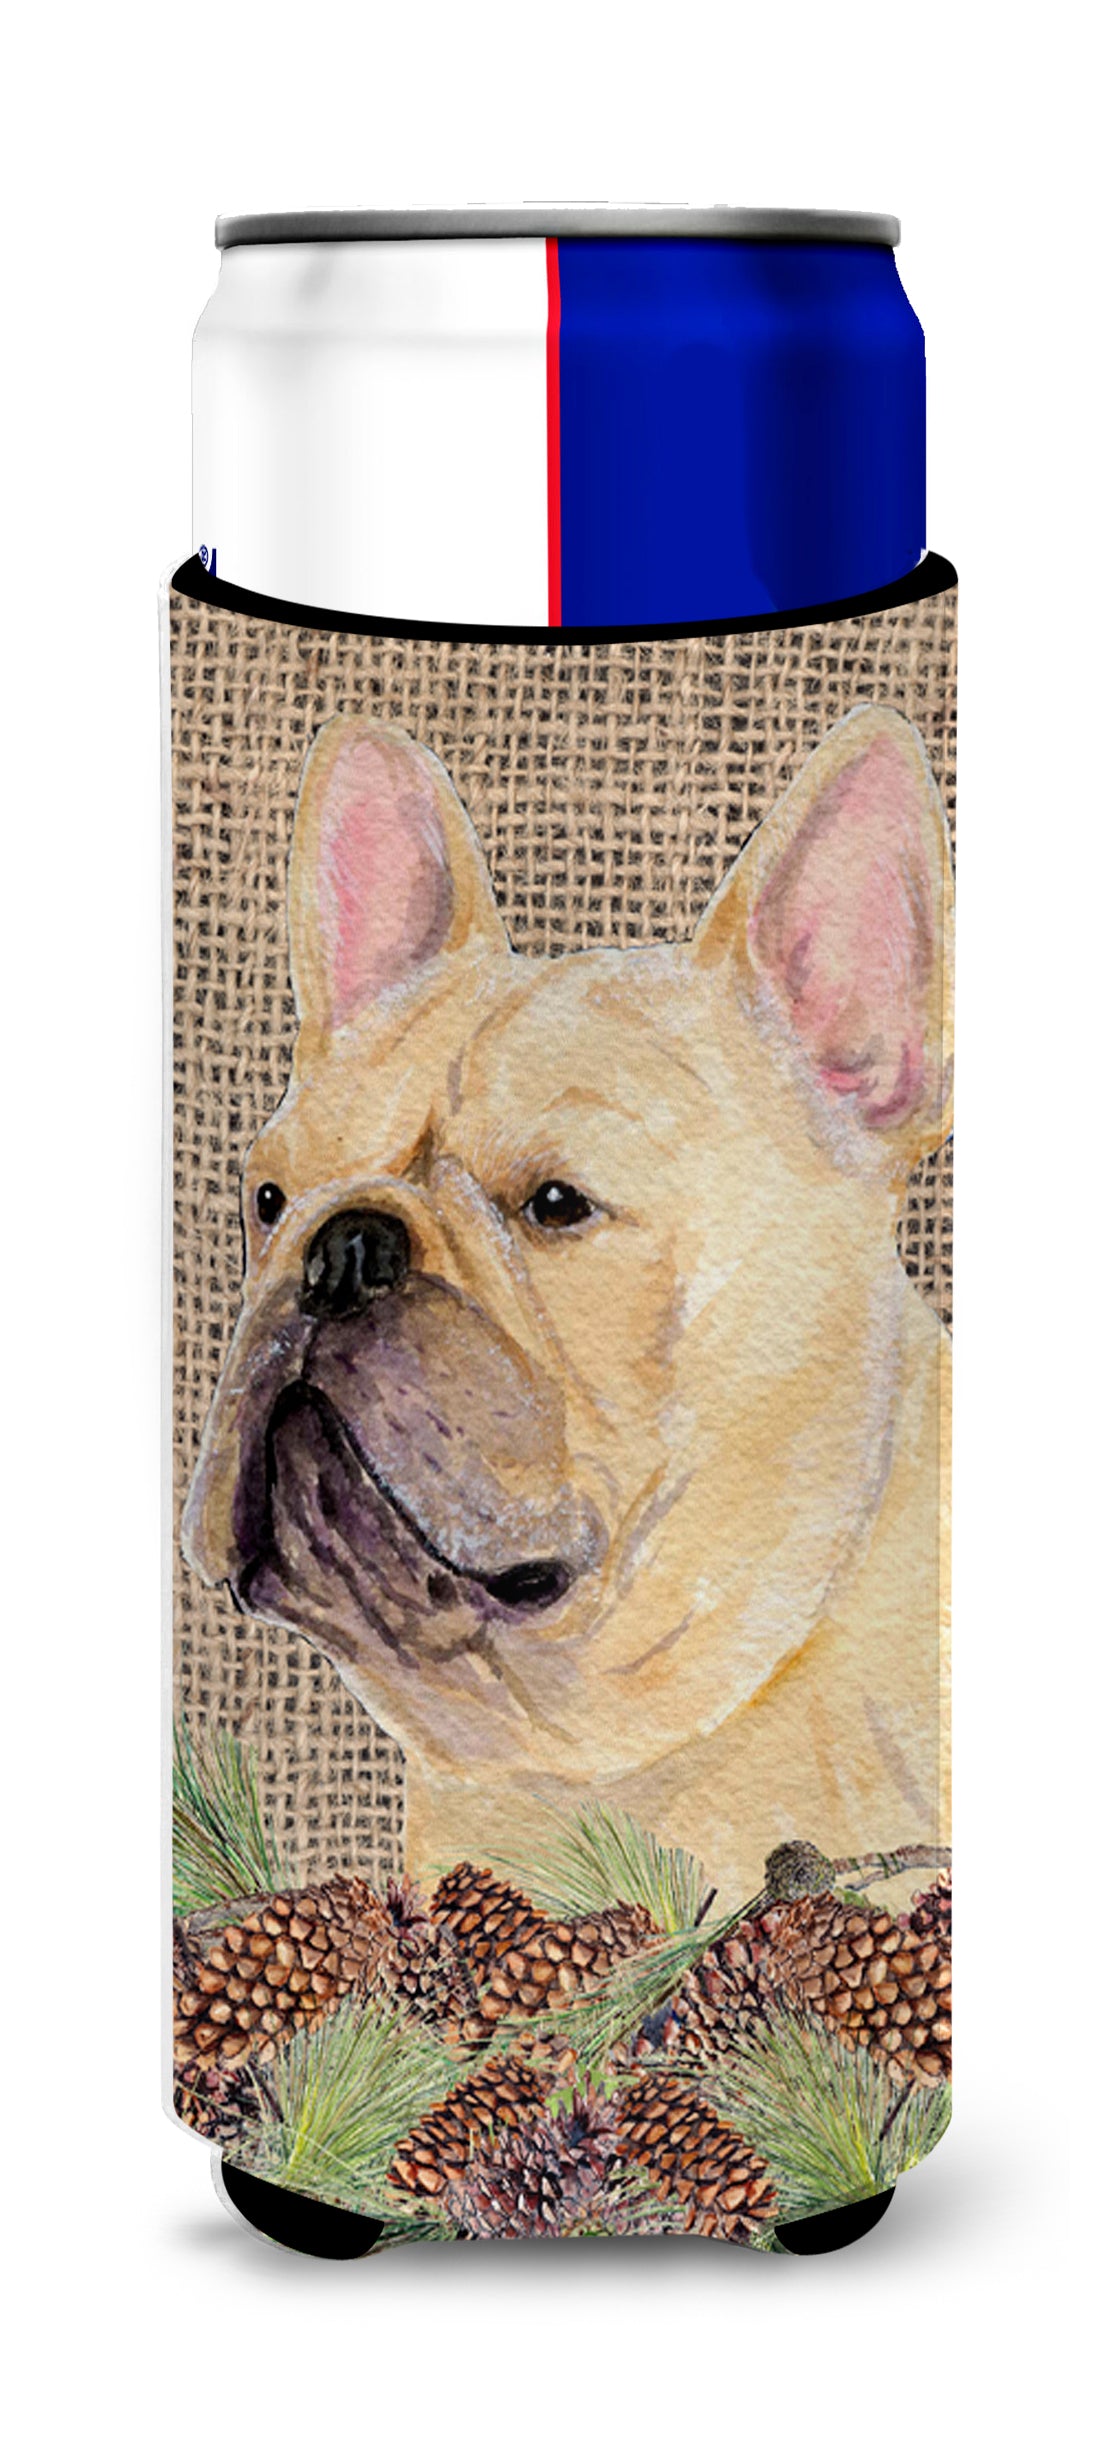 French Bulldog on Faux Burlap with Pine Cones Ultra Beverage Insulators for slim cans SS4076MUK.